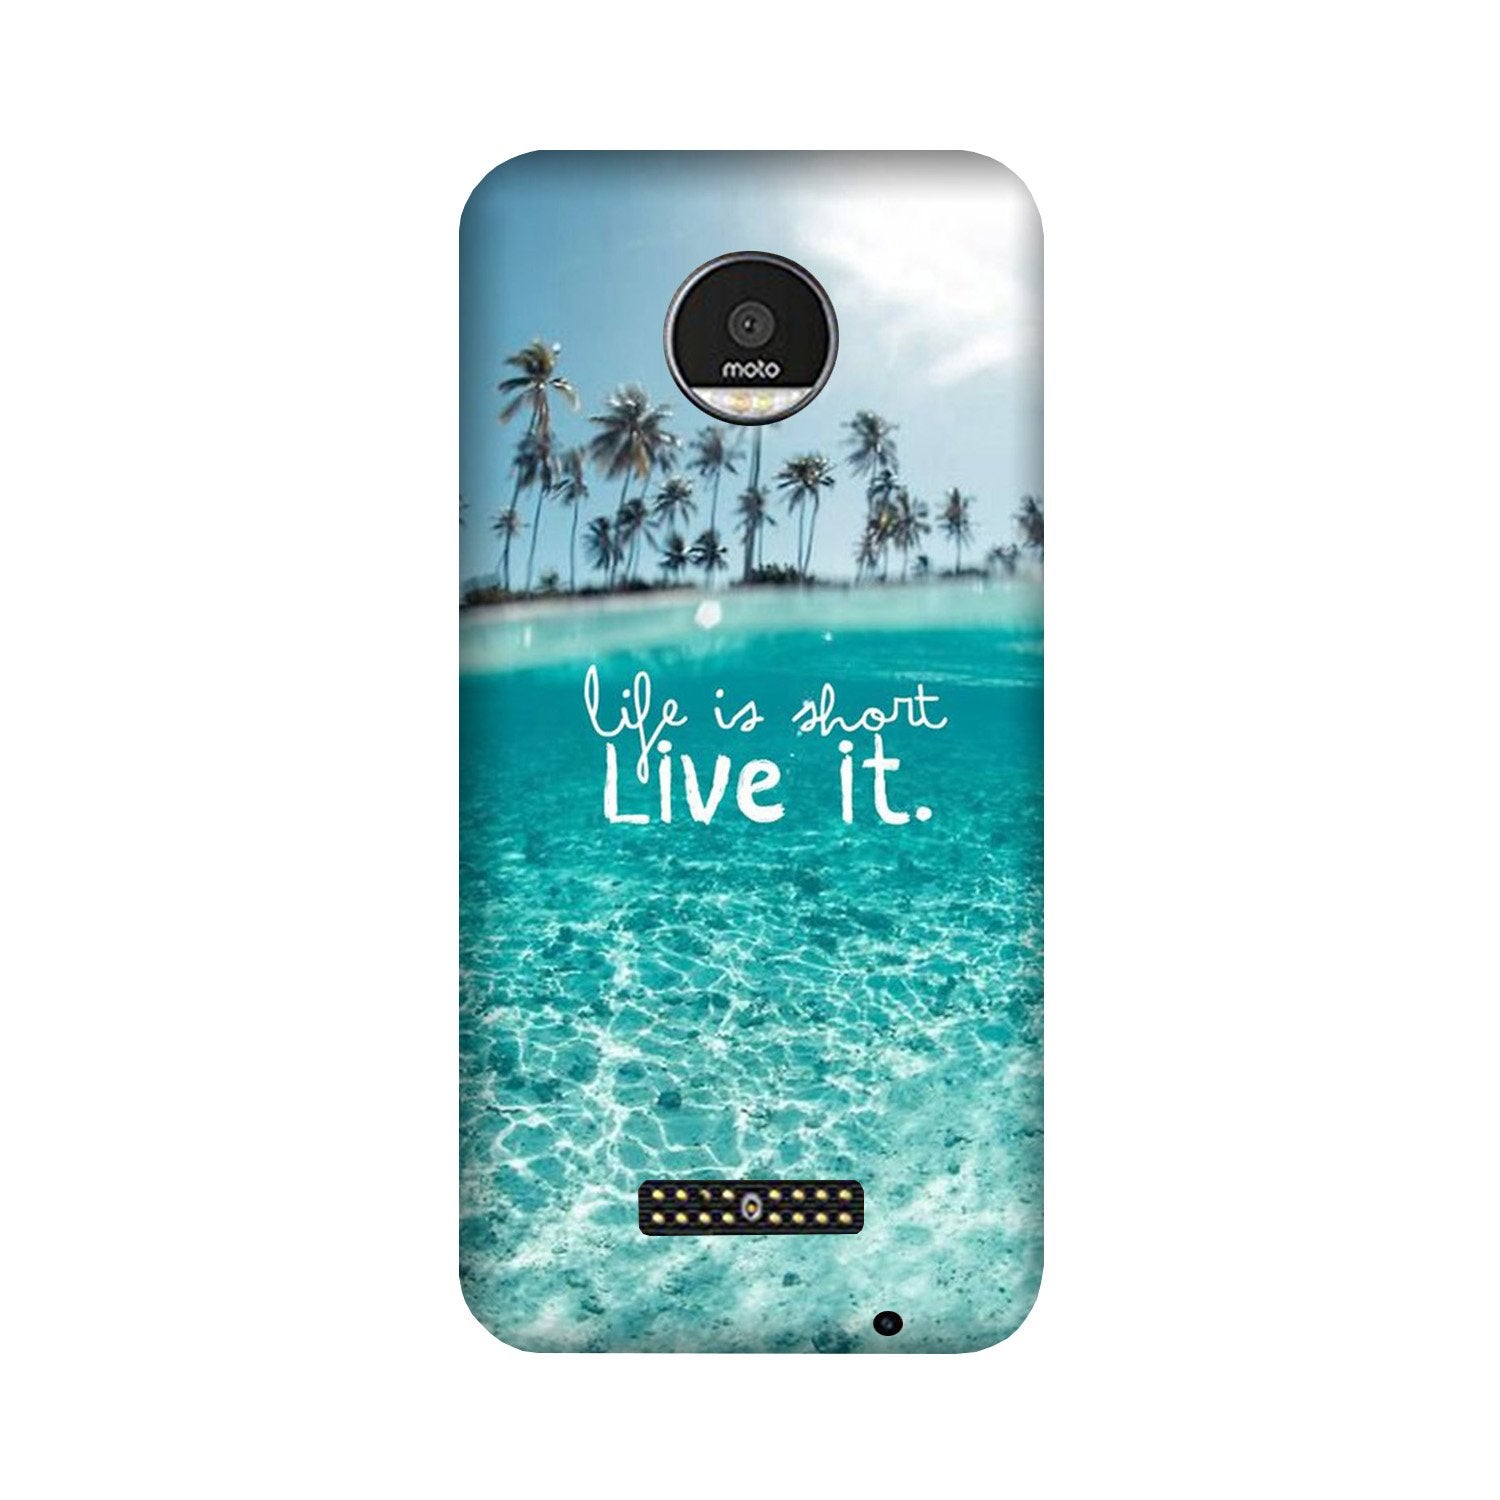 Life is short live it Case for Moto Z2 Play